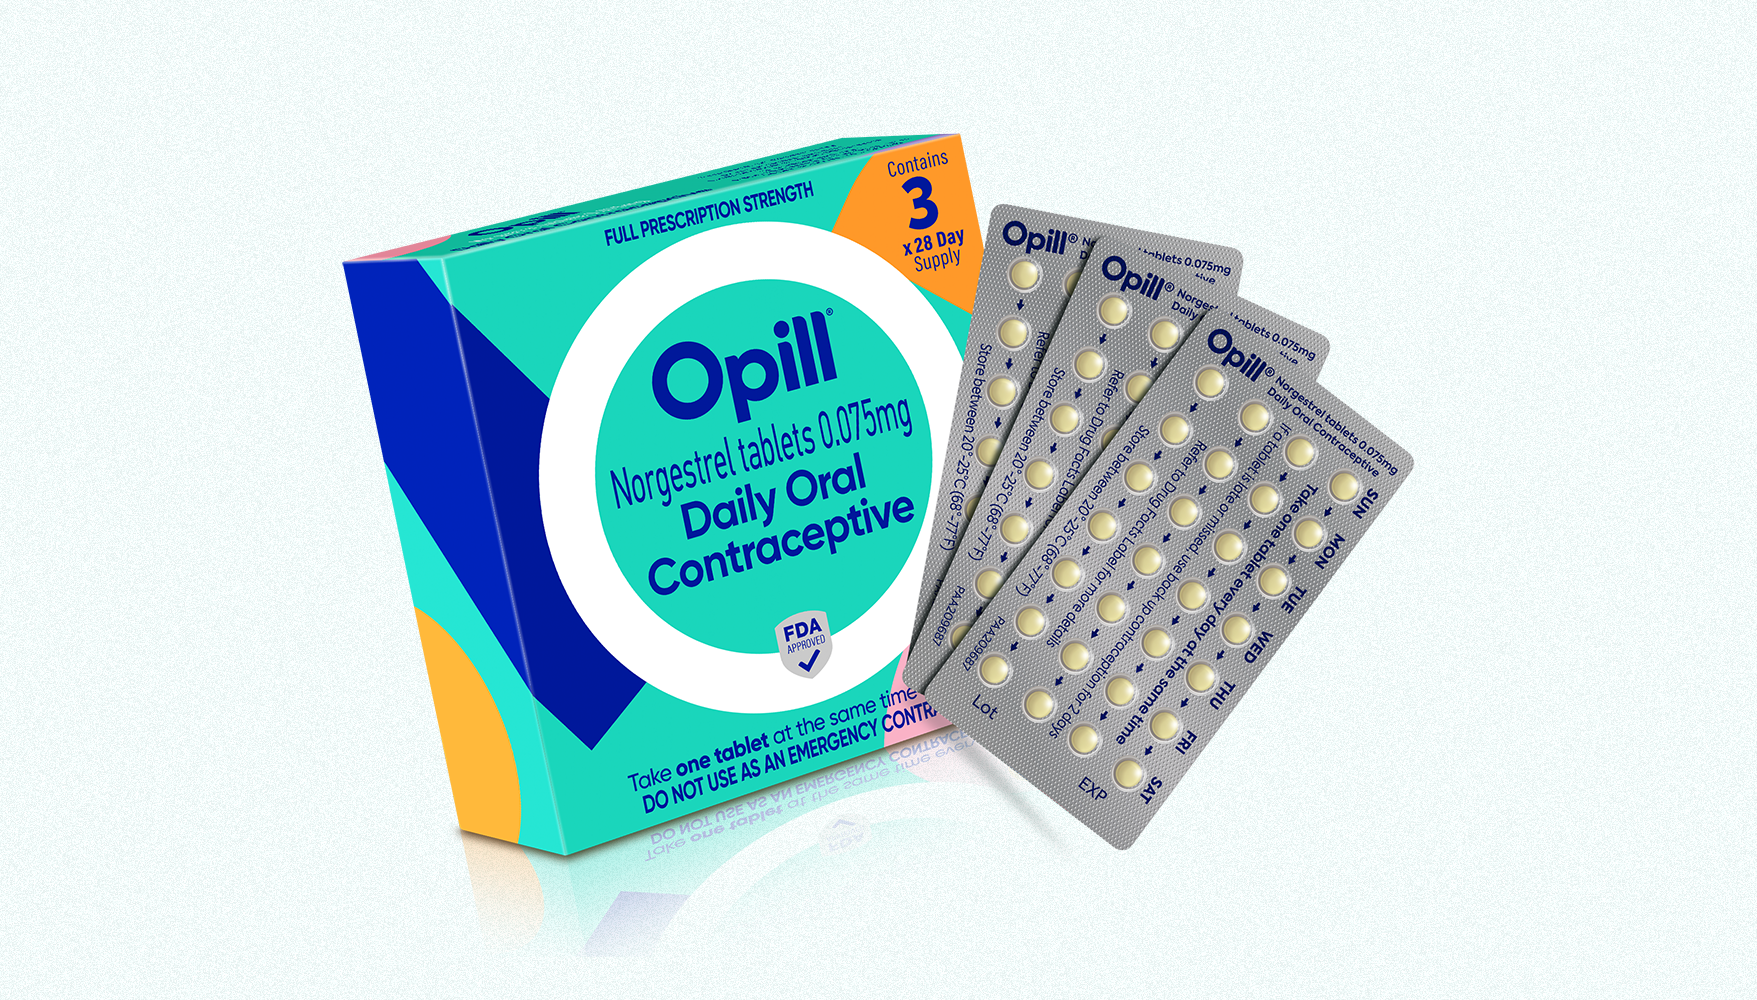 What You Need to Know About Opill, the First FDA-Approved Over-the-Counter Birth Control Pill